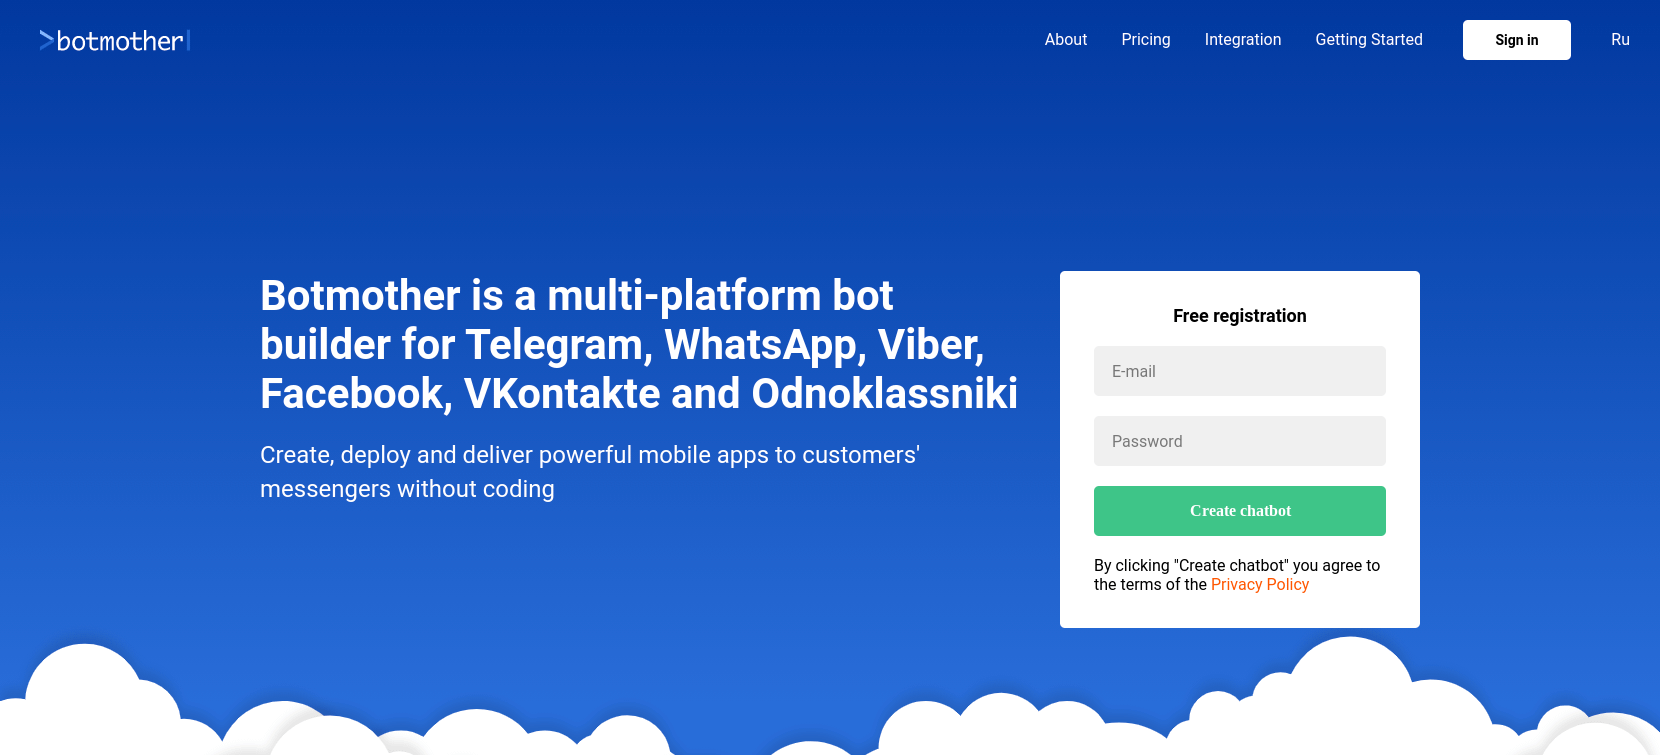 The Botmother chatbot website.